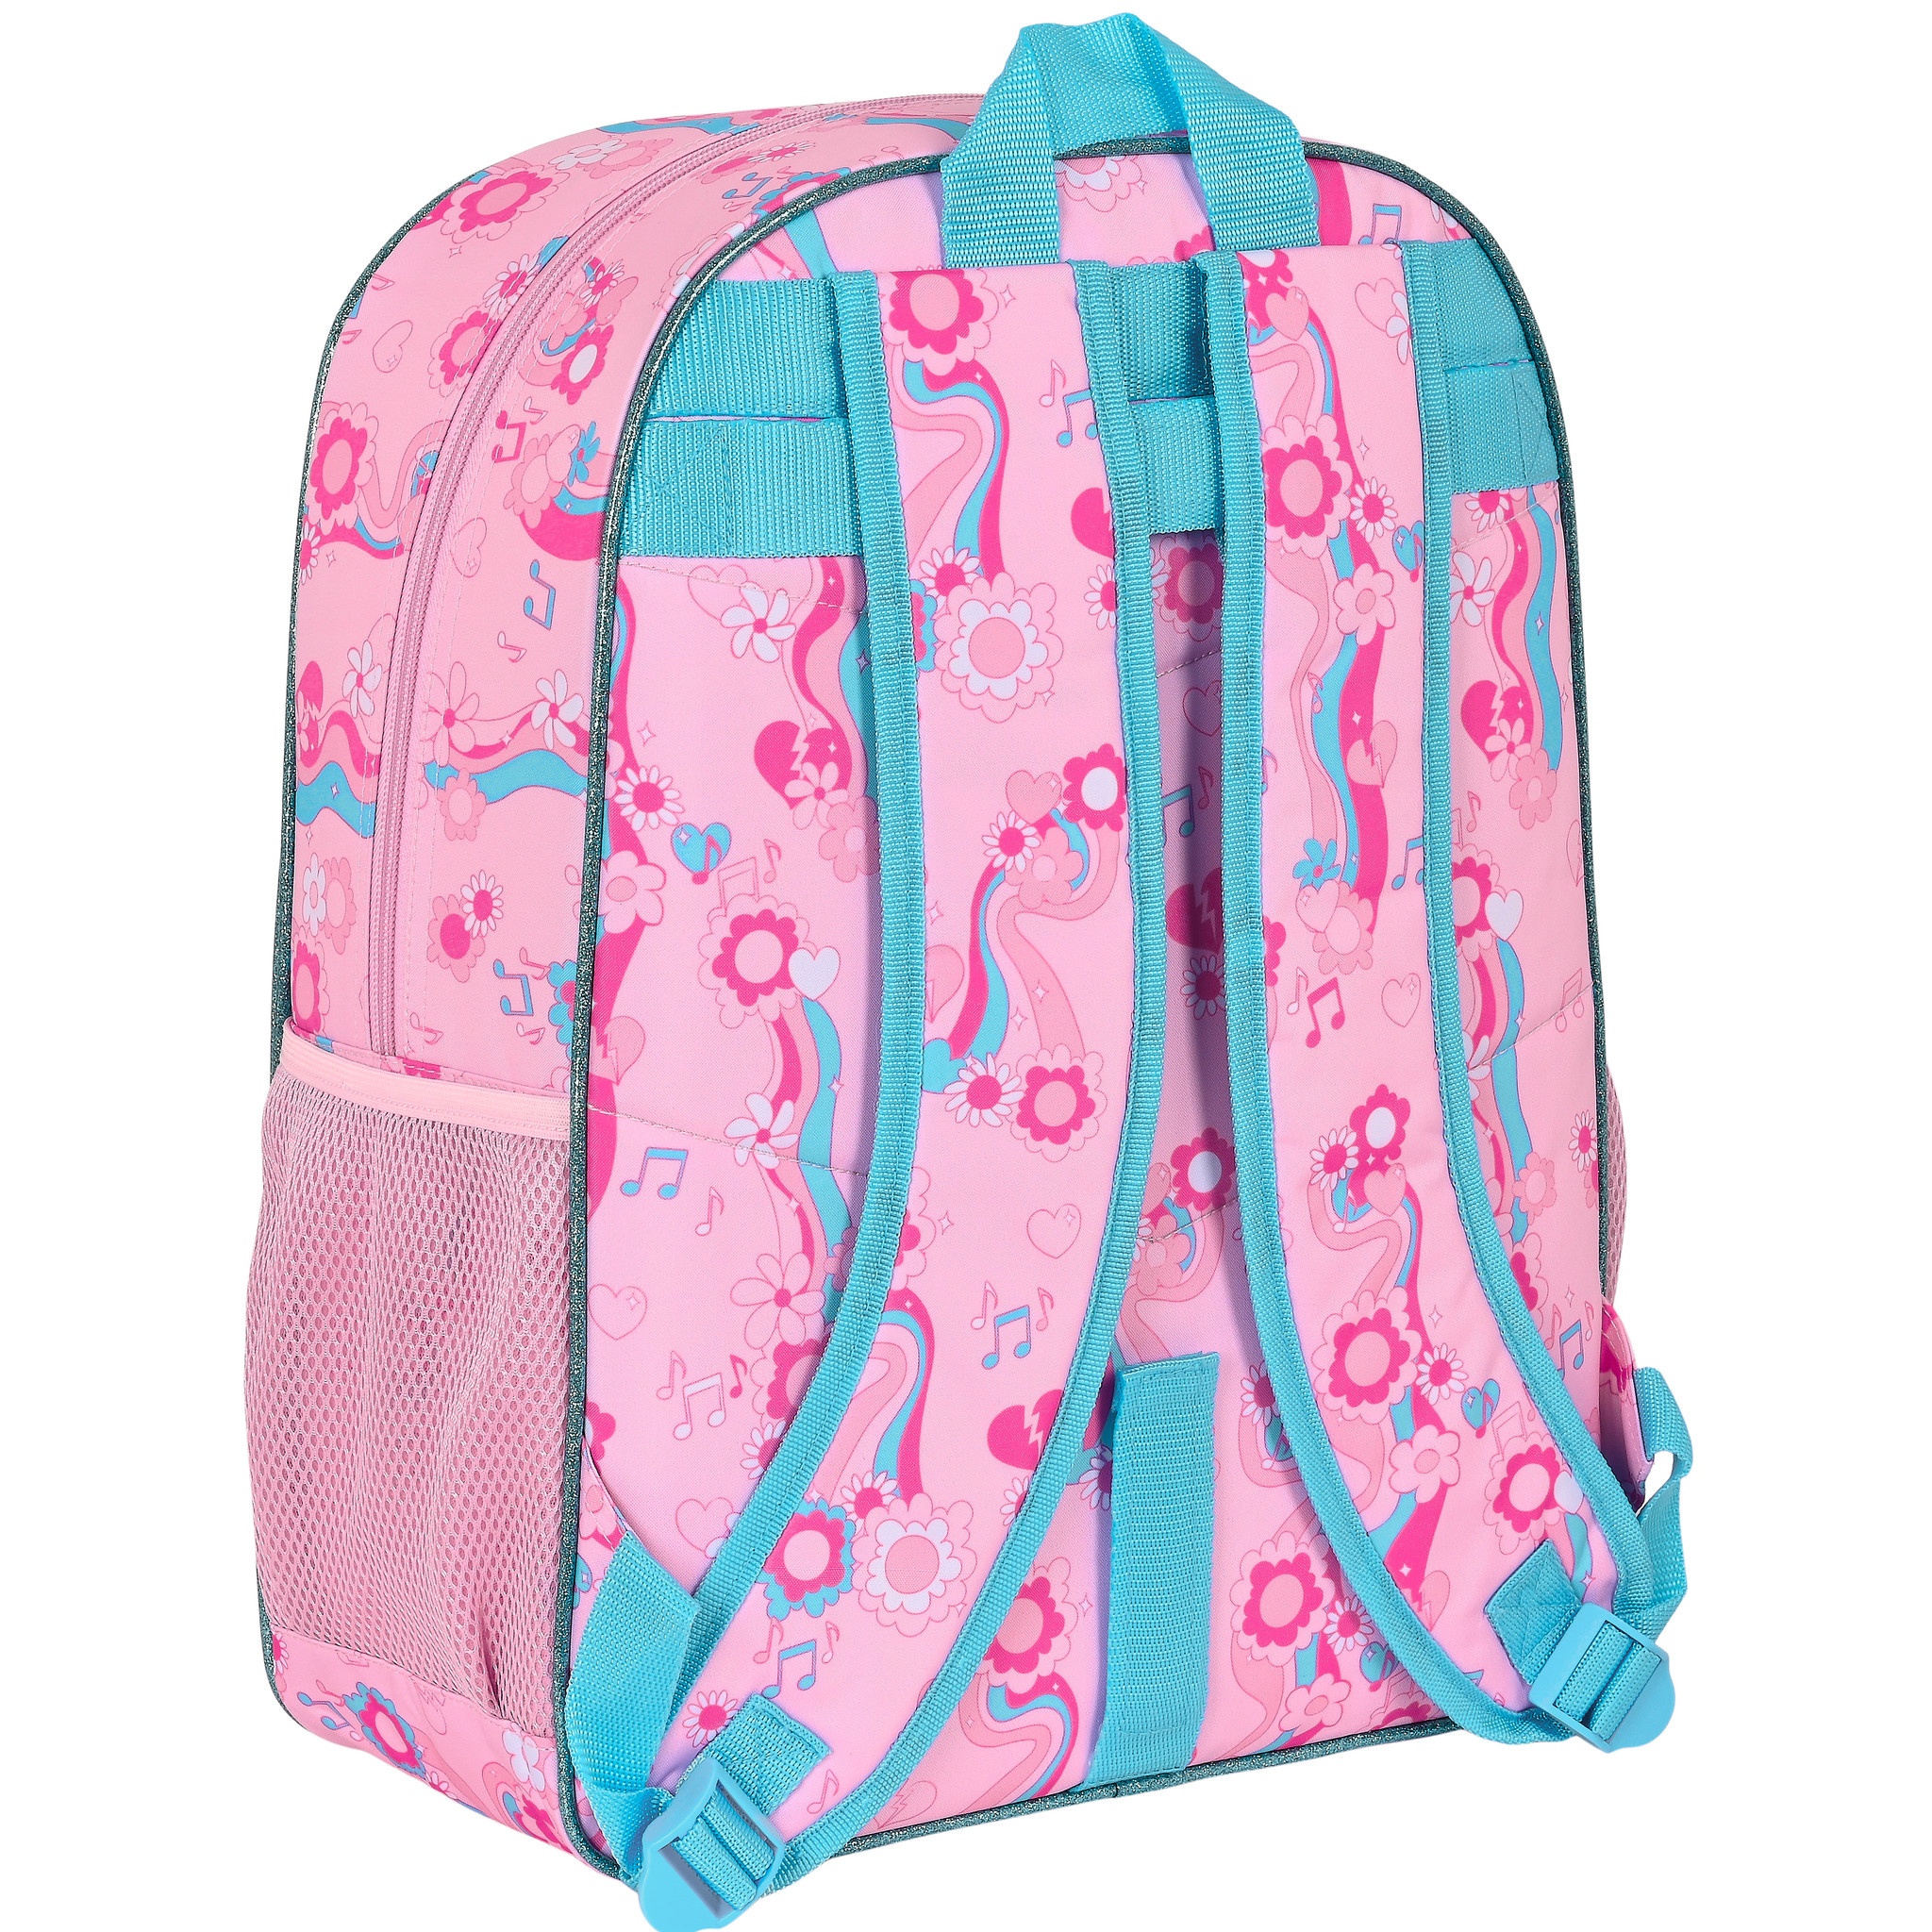 L.O.L. Surprise Backpack, Glow Girl - 42 x 33 x 14 cm - Polyester